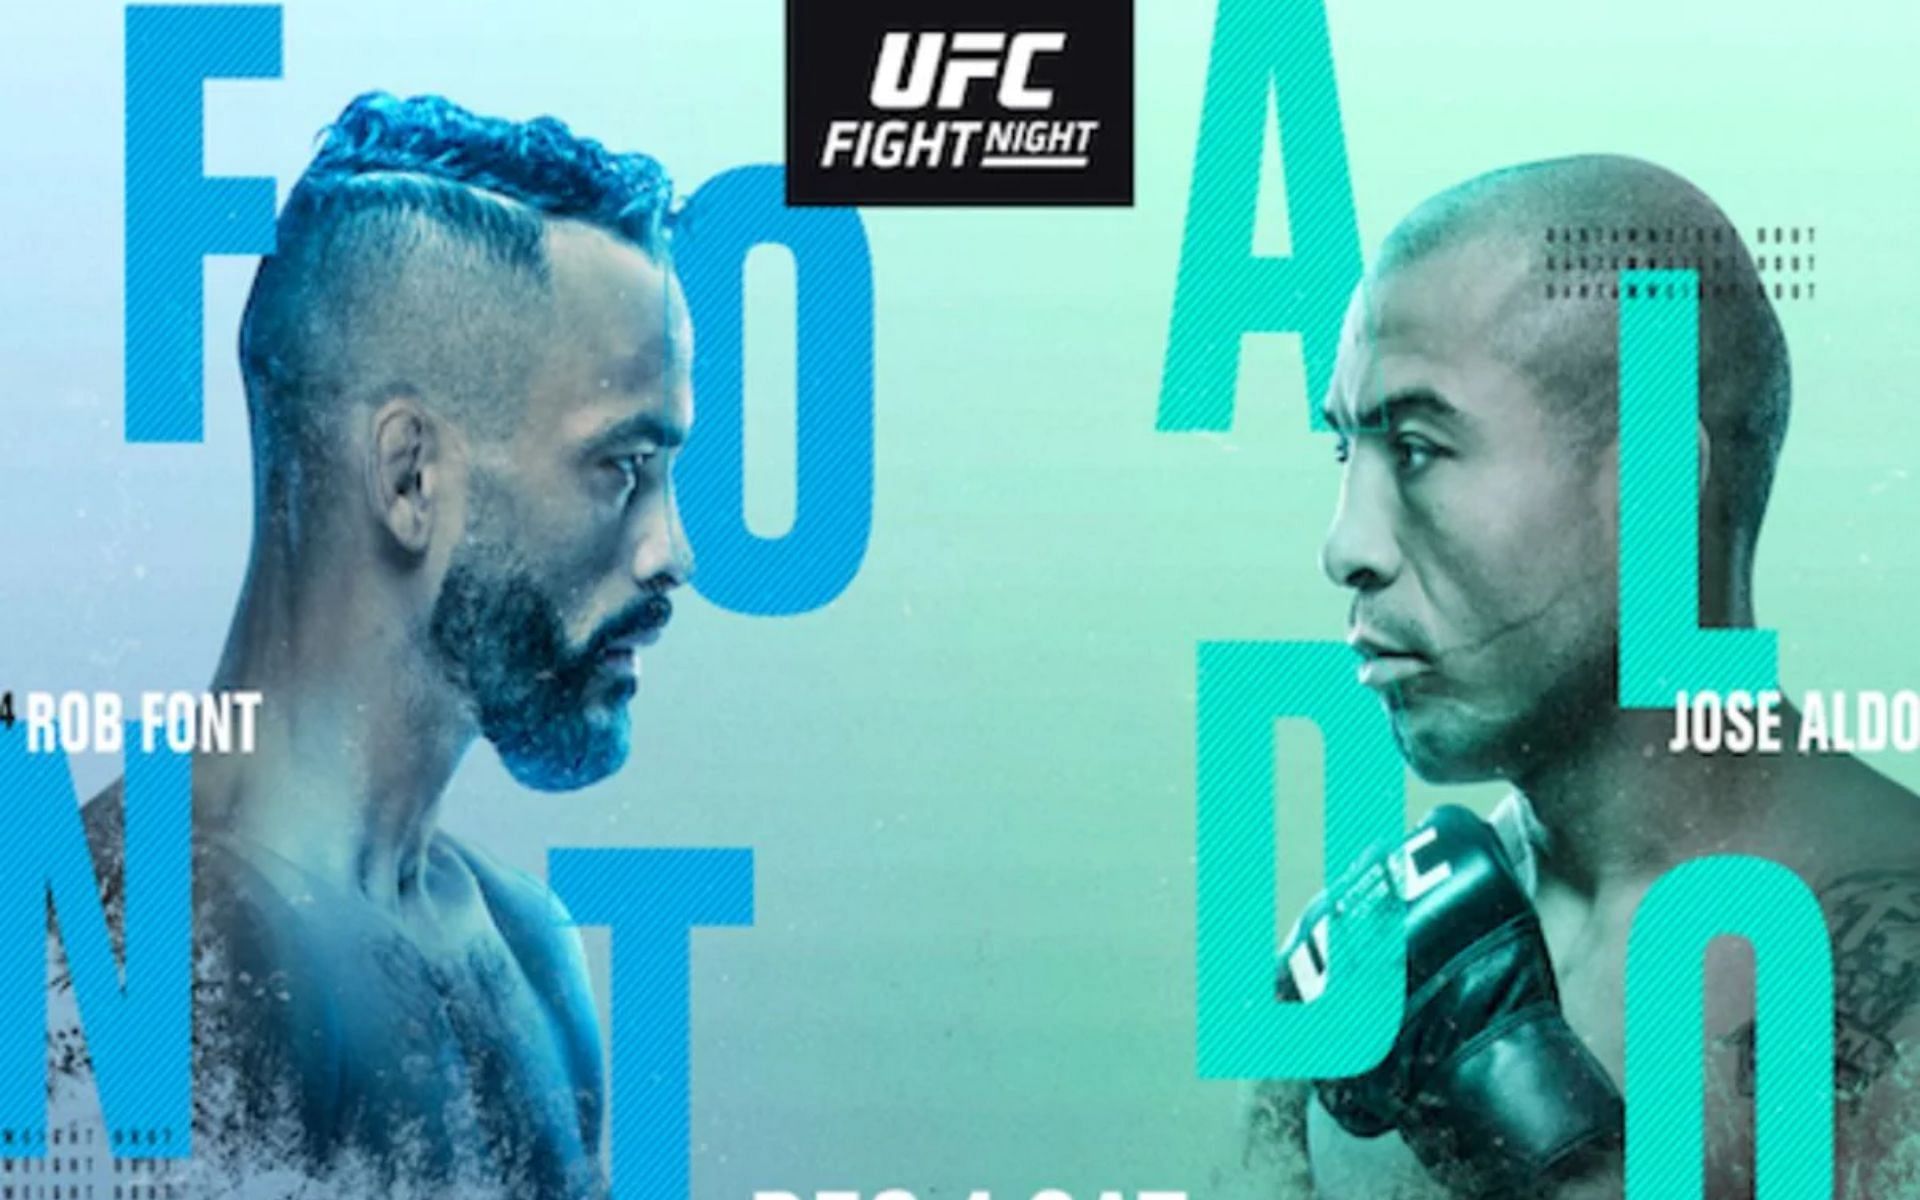 Jose Aldo and Rob Font face off in this weekend&#039;s UFC headline bout